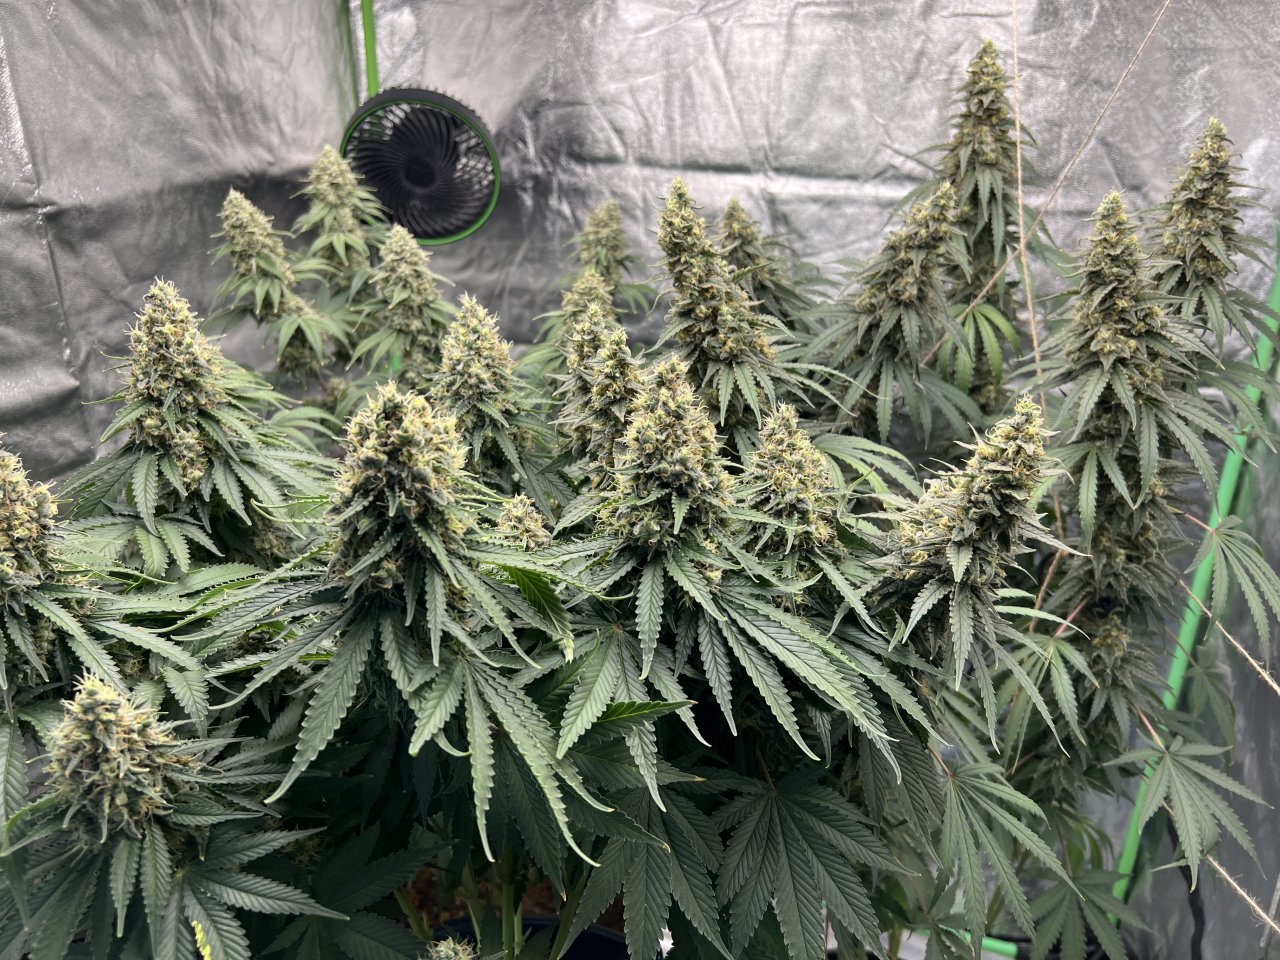 Family photo Day 80 and day 52 of flower (week 7.5)